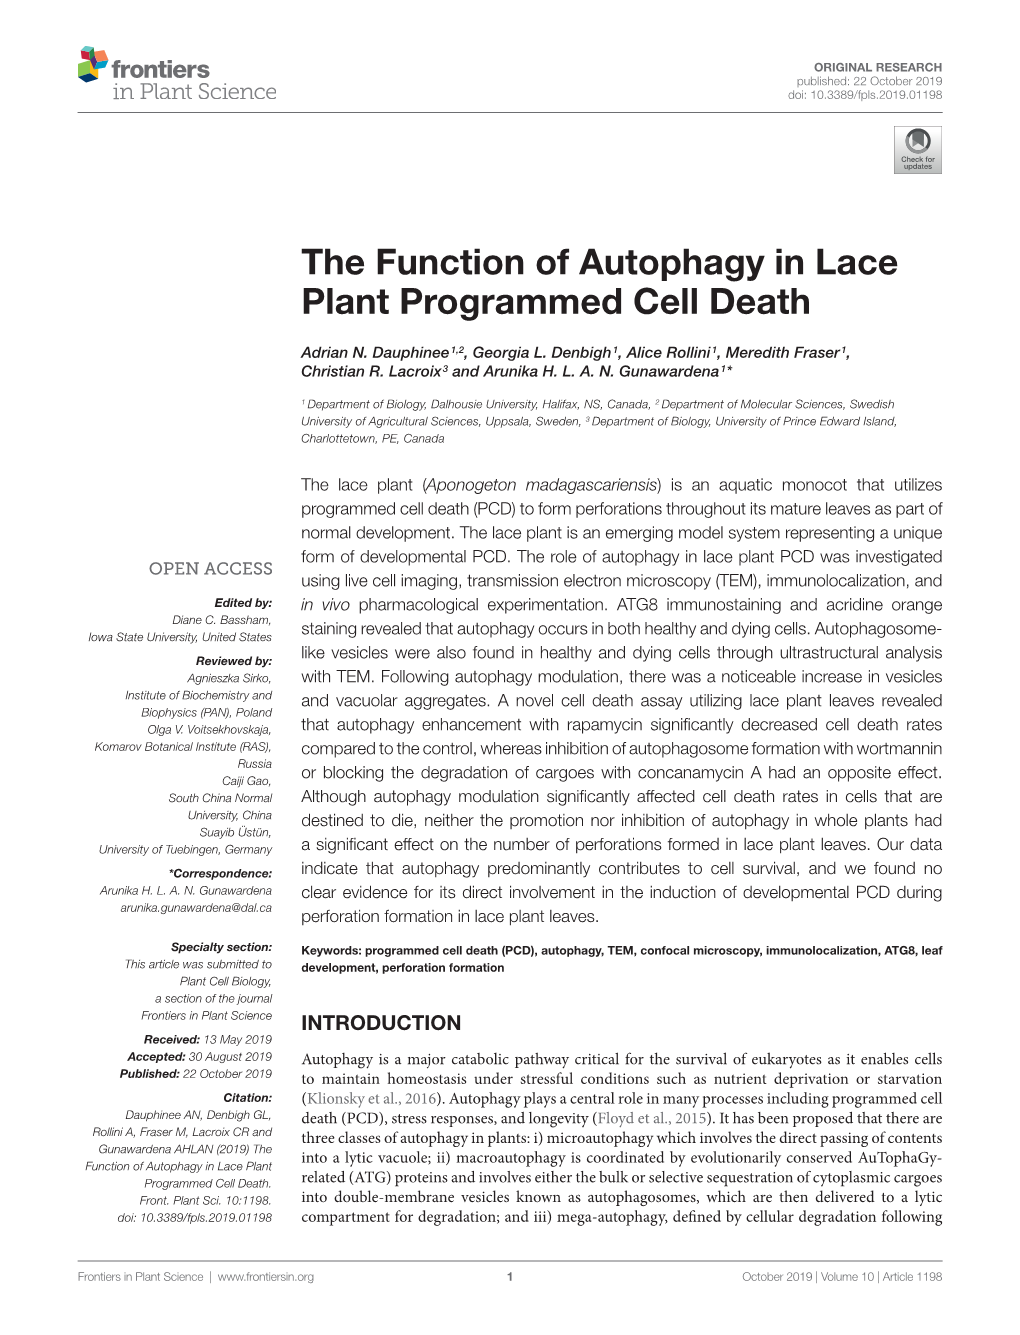 The Function of Autophagy in Lace Plant Programmed Cell Death